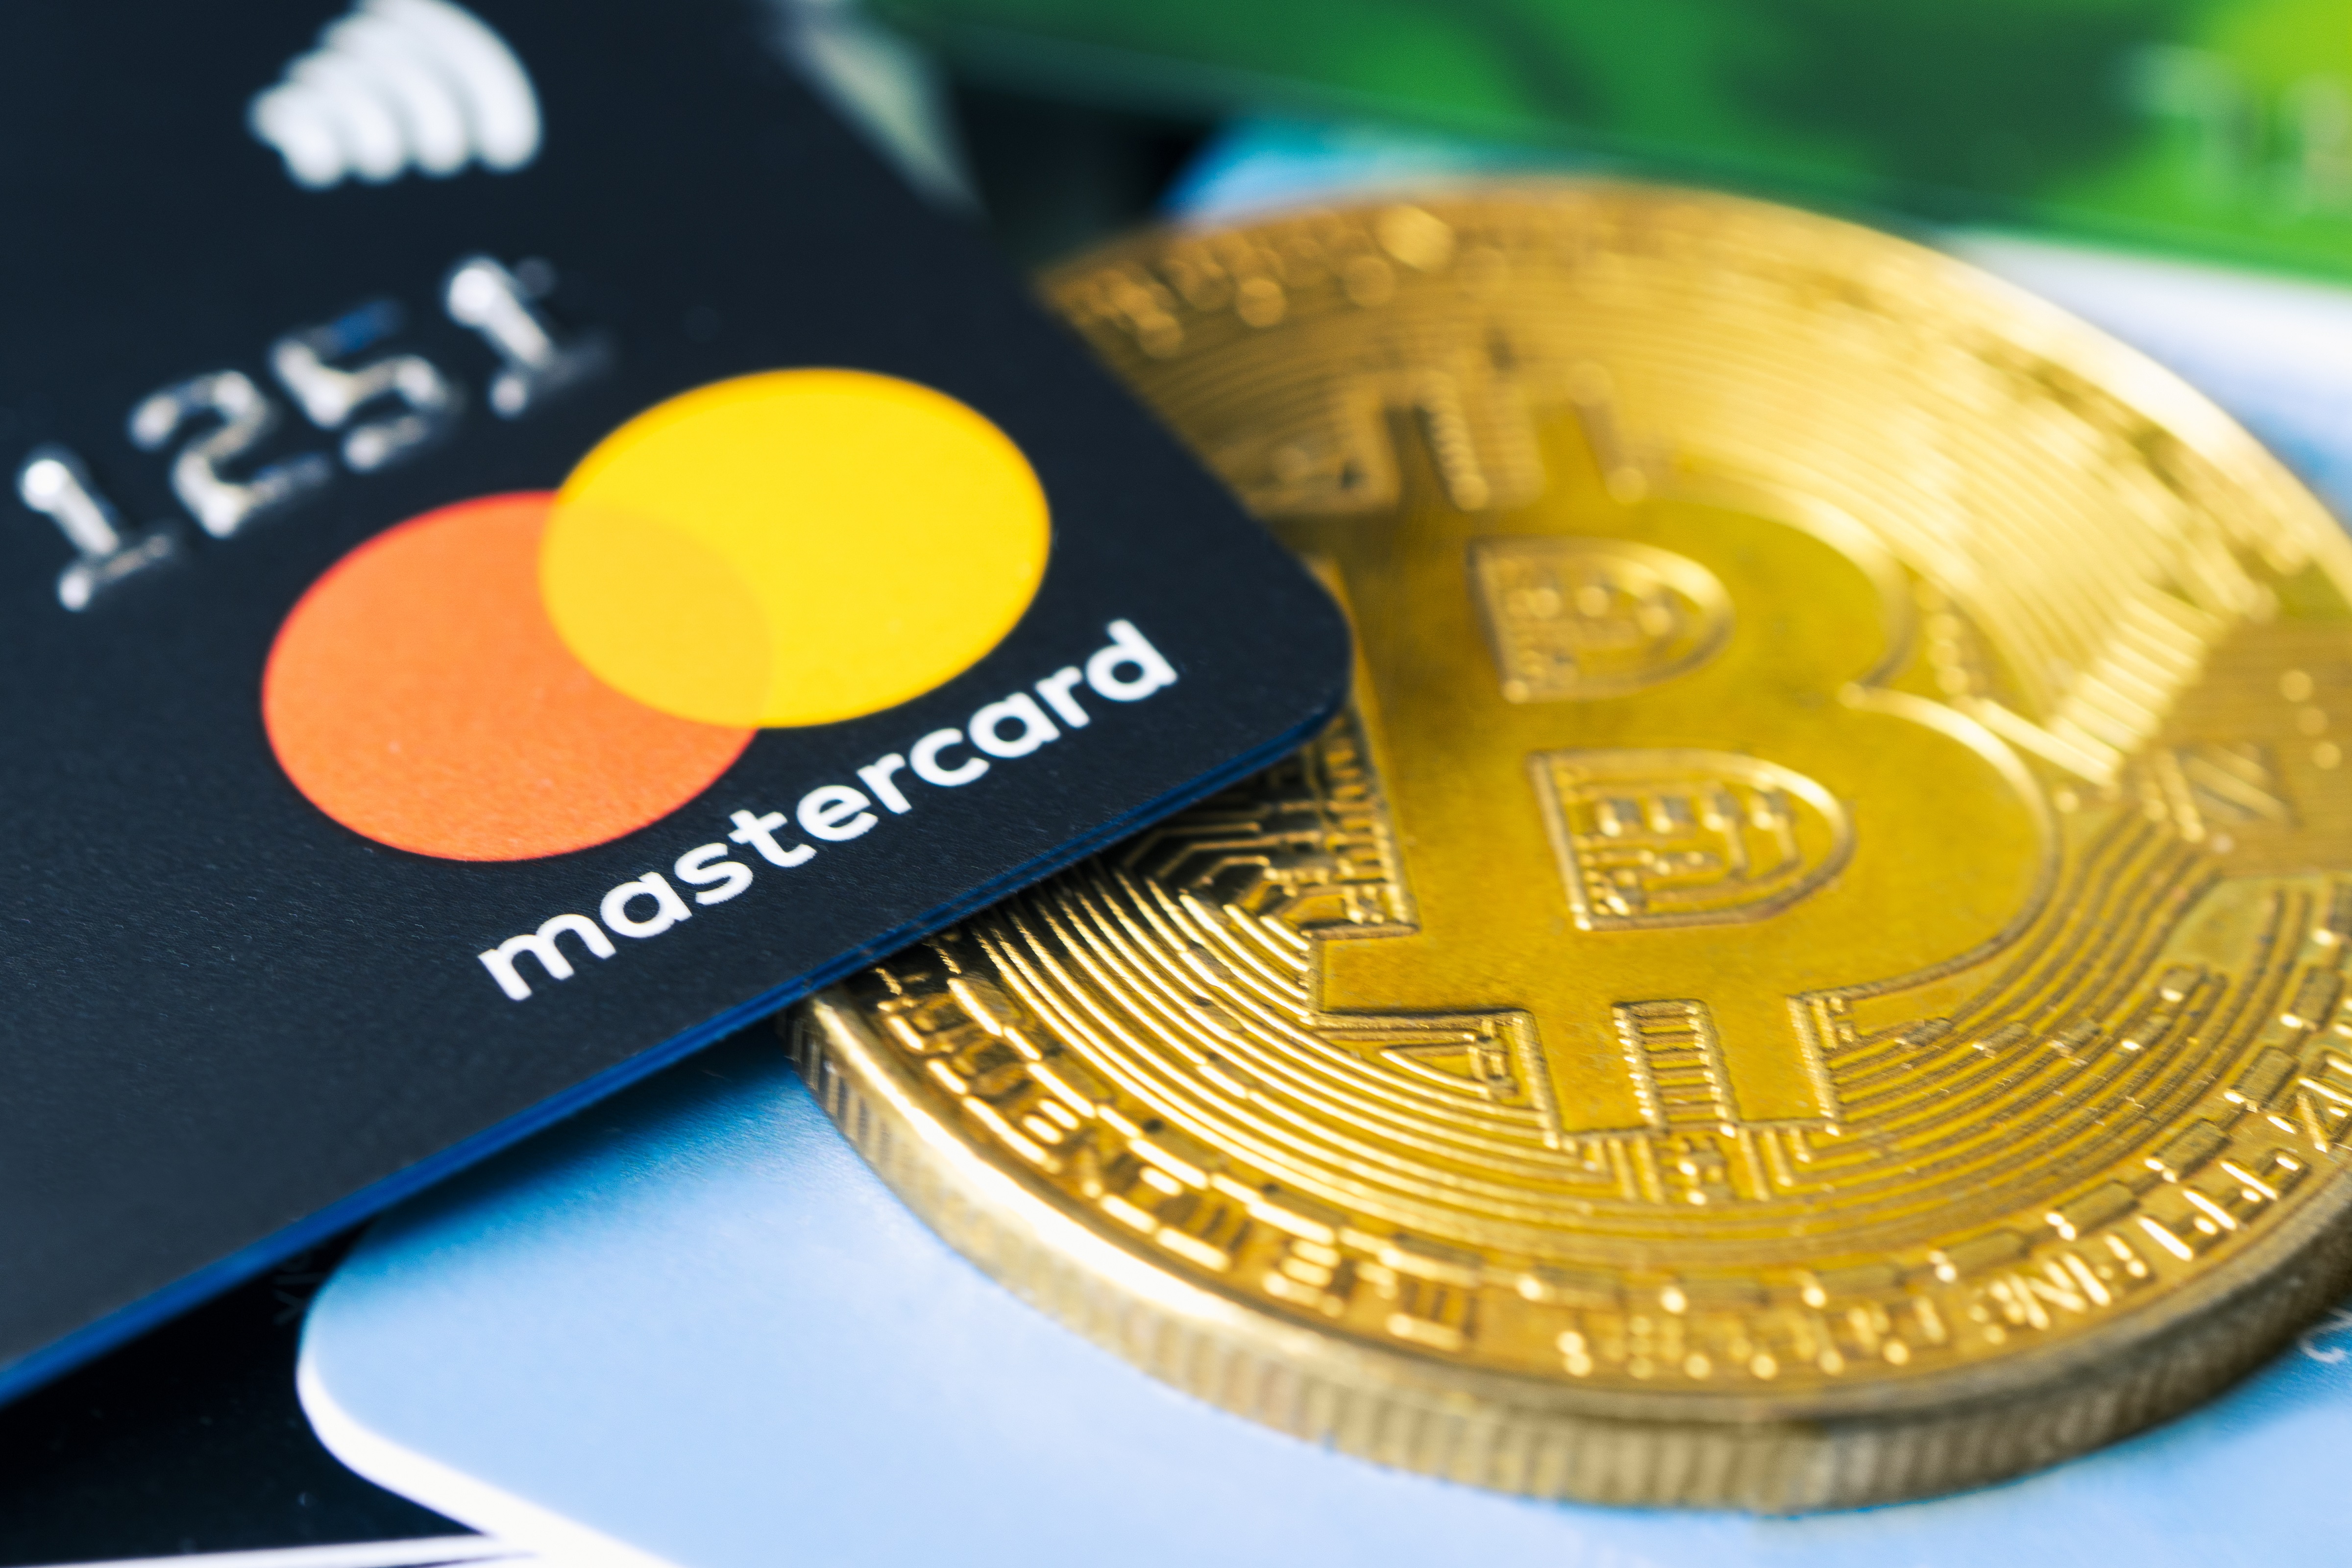 Mastercard Expands In The Crypto Industry Through Partnerships